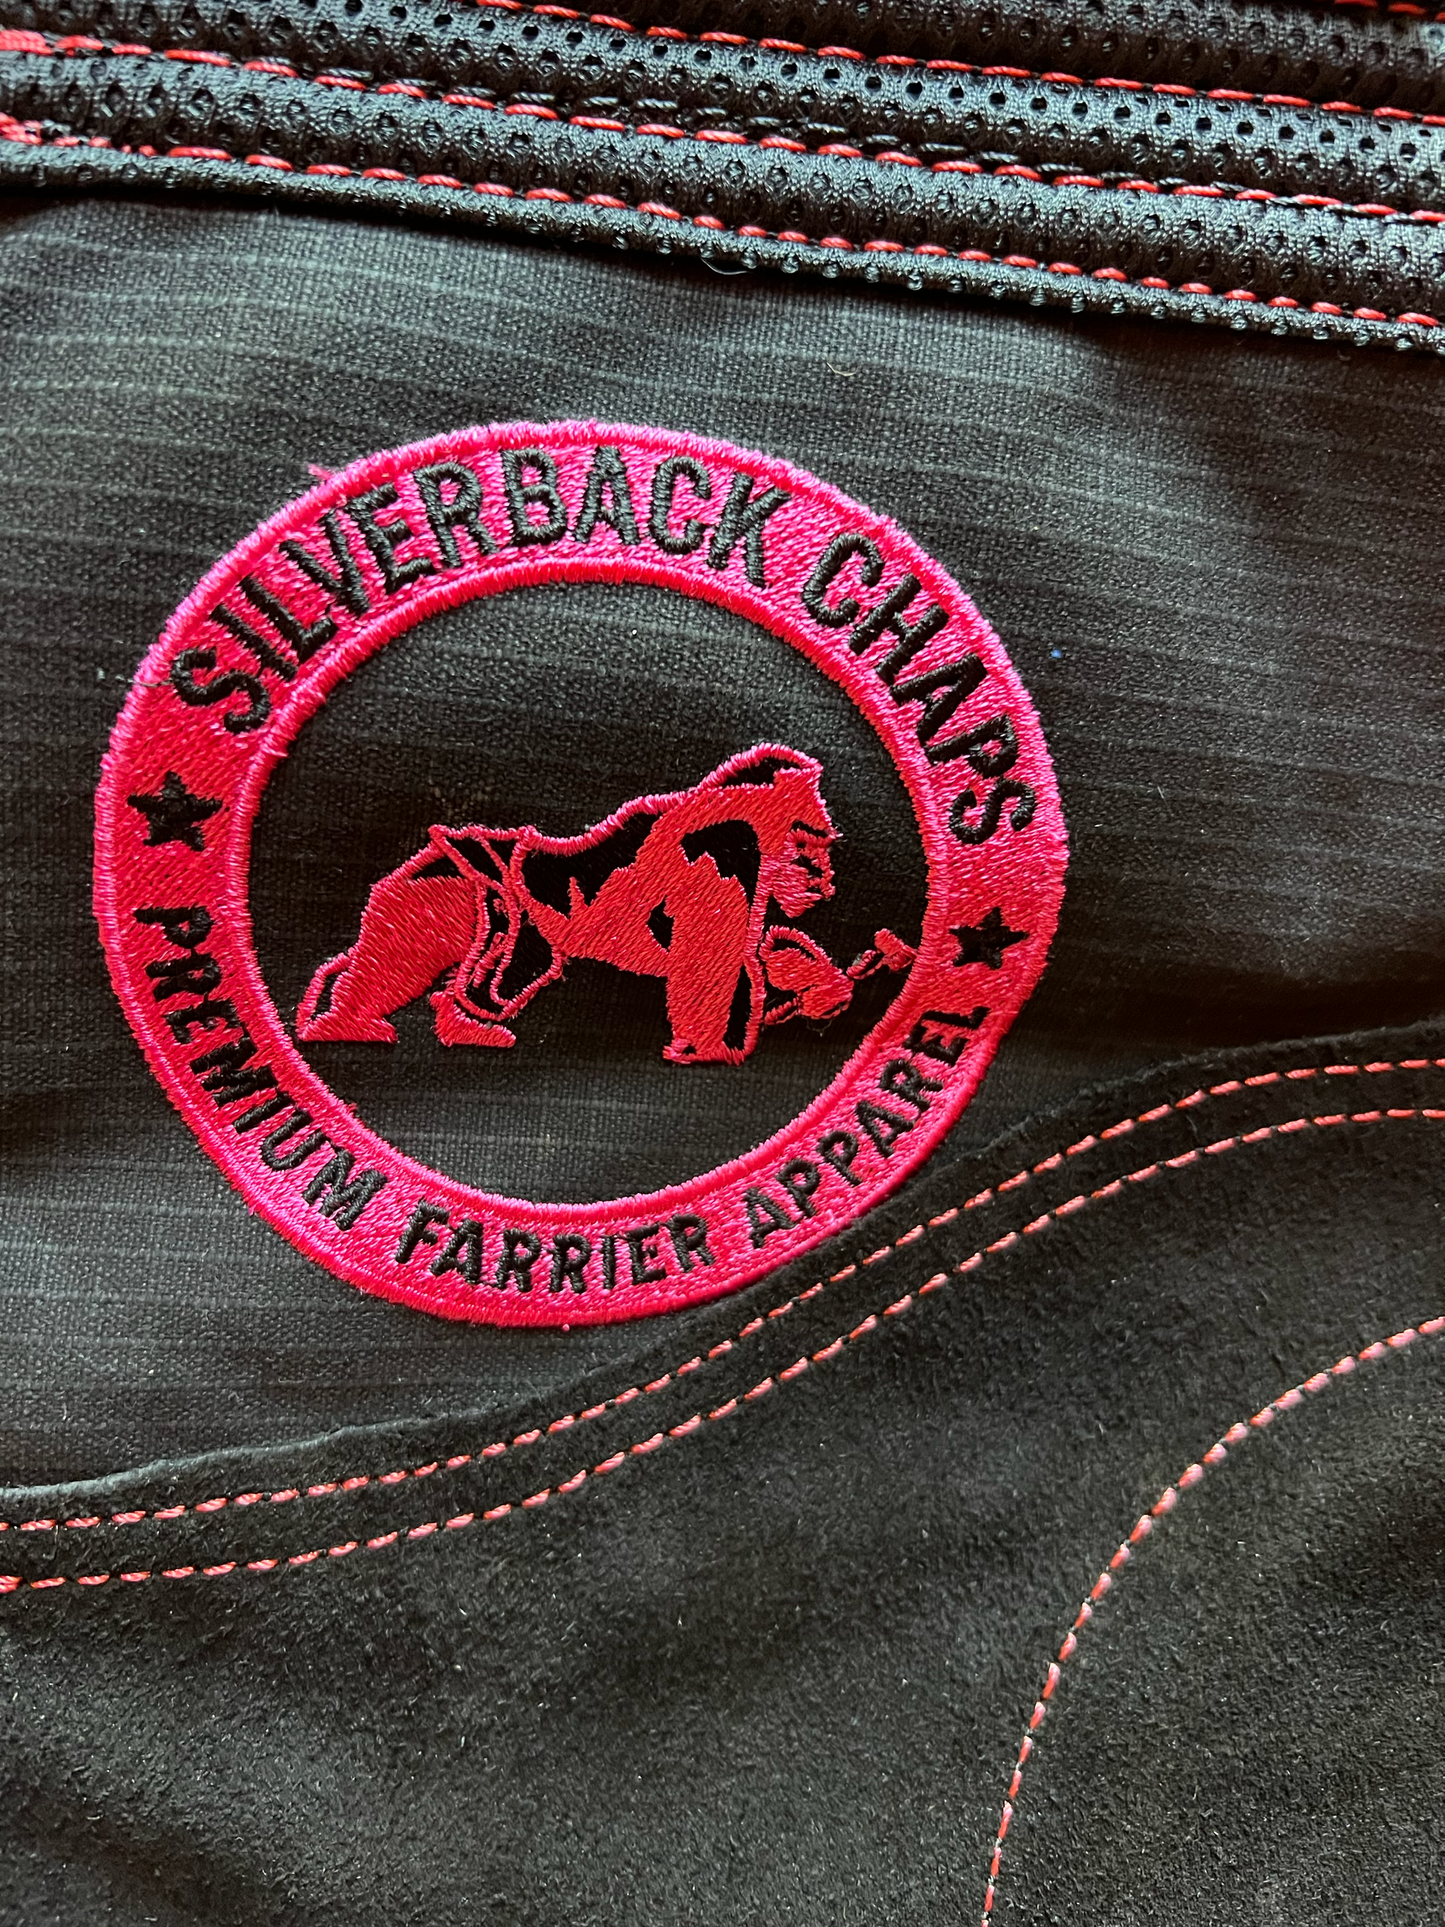 SILVERBACK CHAPETTE ORIGINAL BLACK WITH PINK STITCH AND BADGE